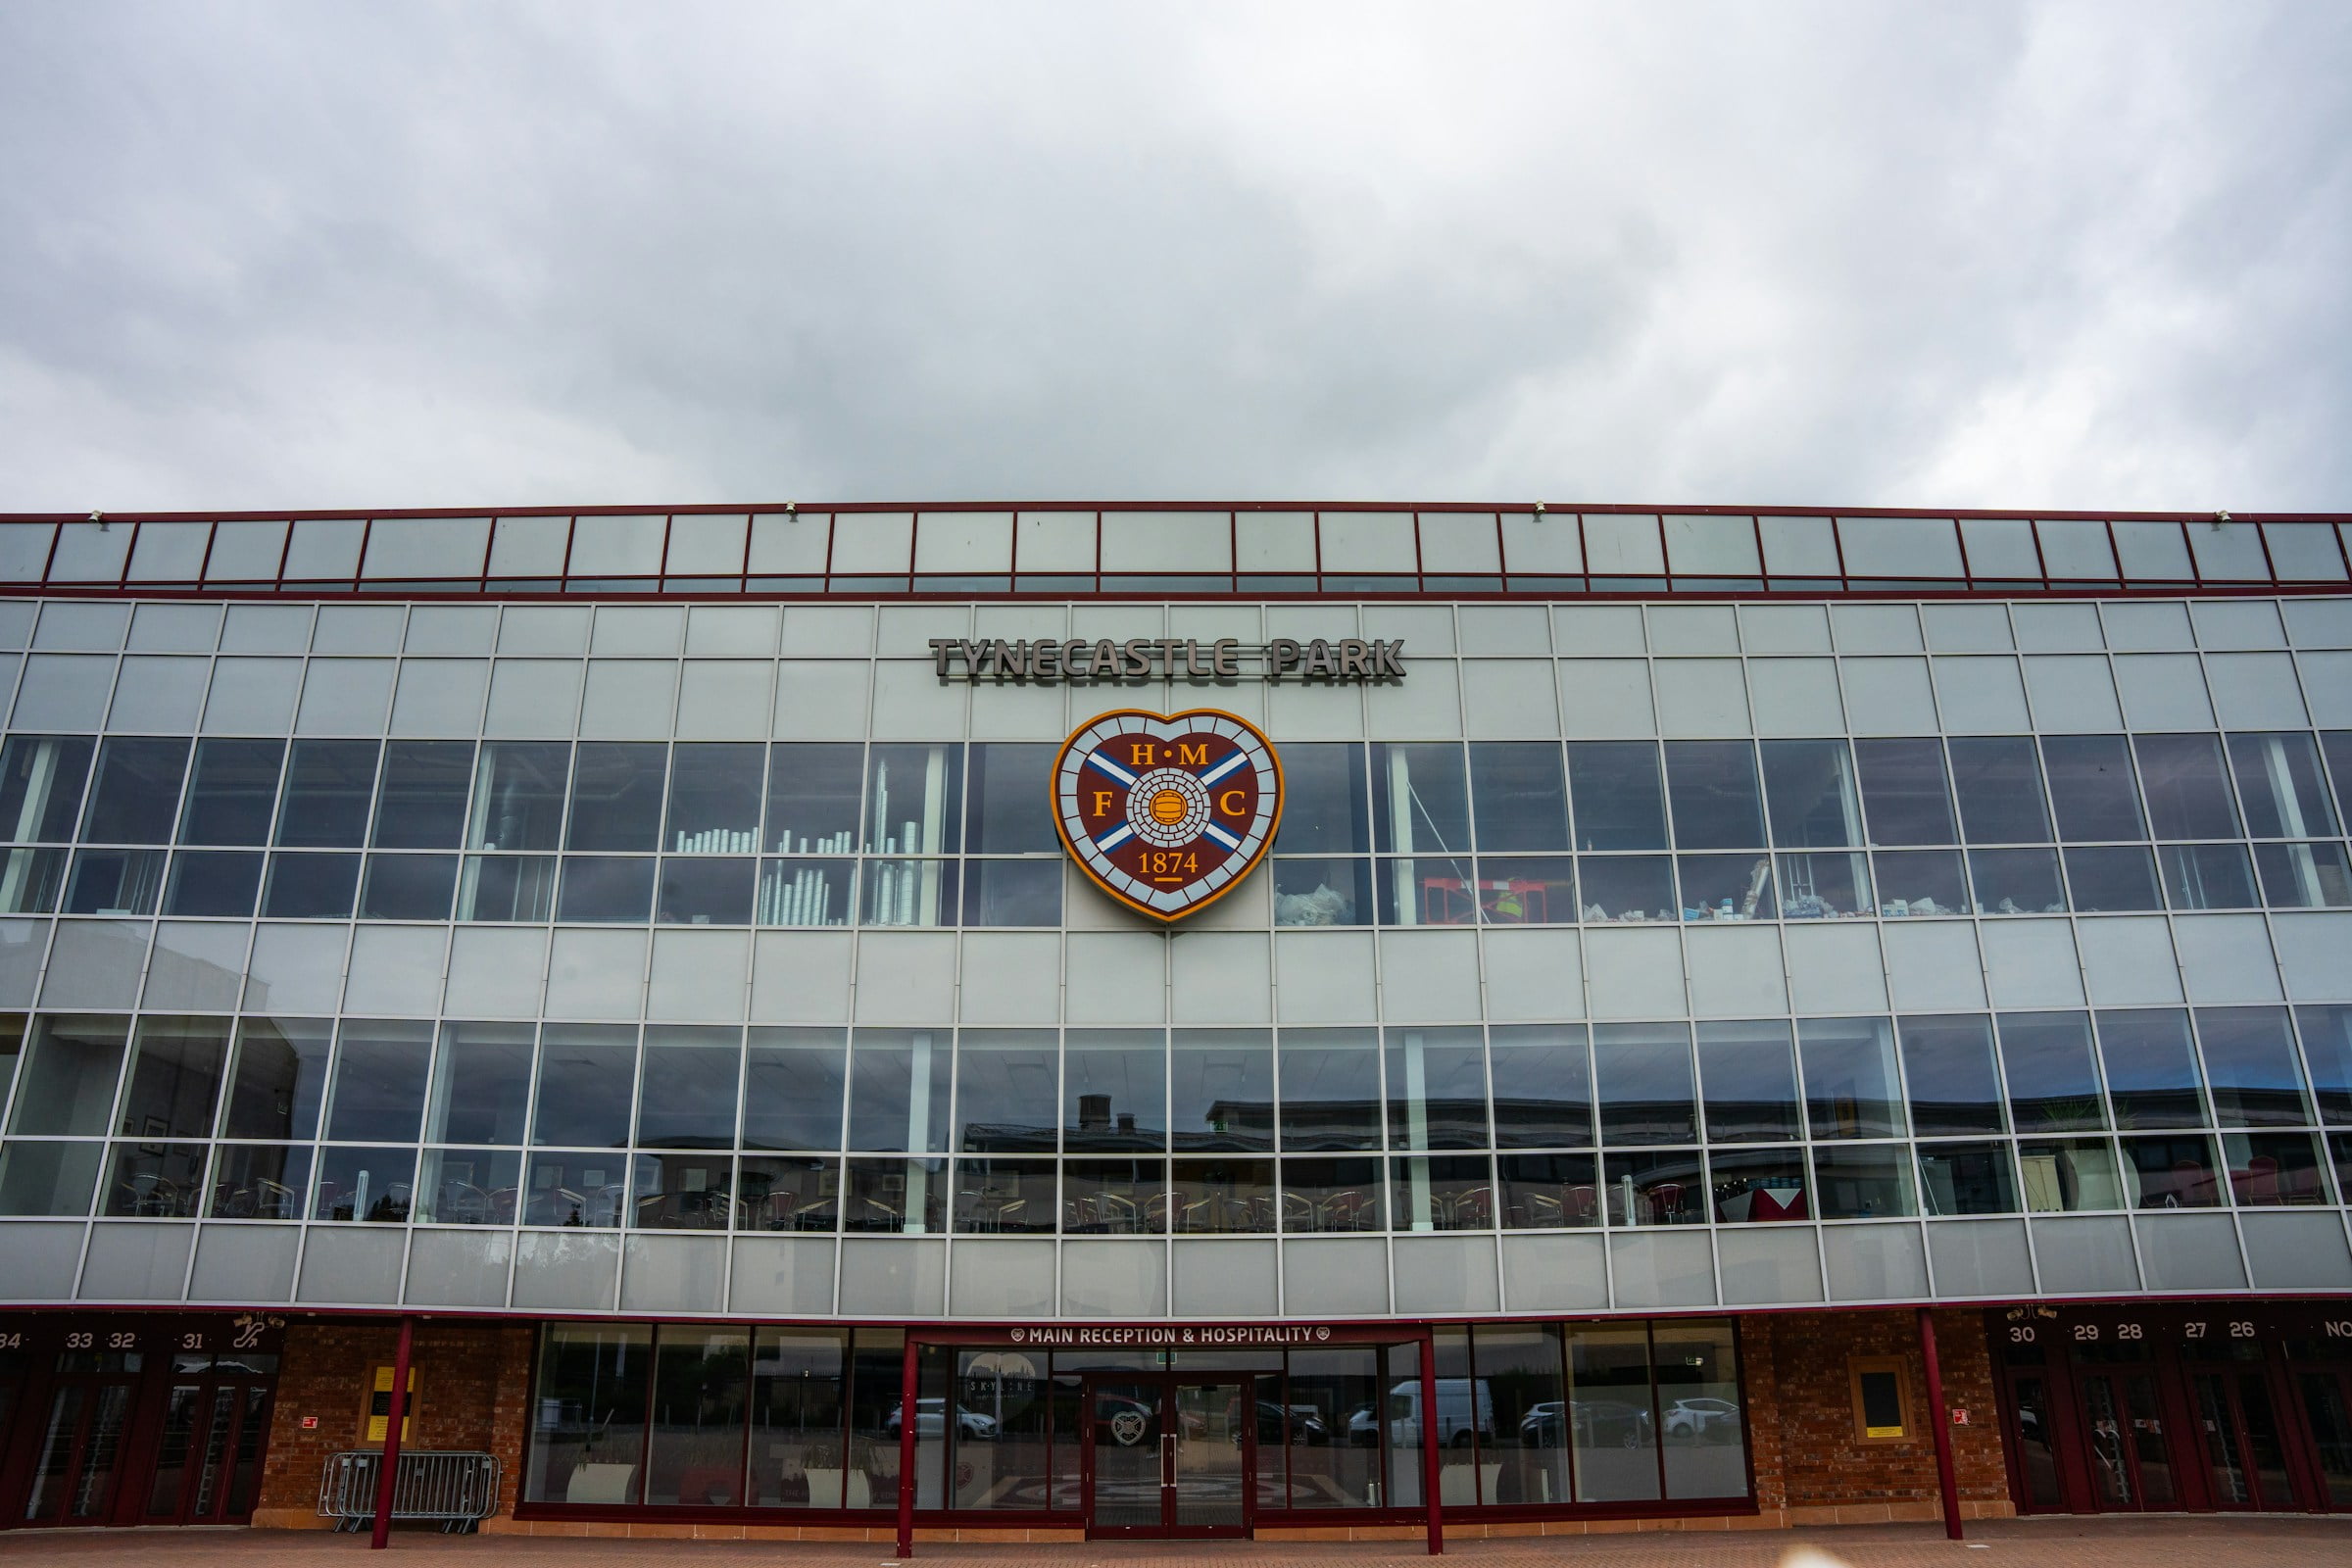 Front view of Tynecastle Park stadium, with cloudy skies behind it.